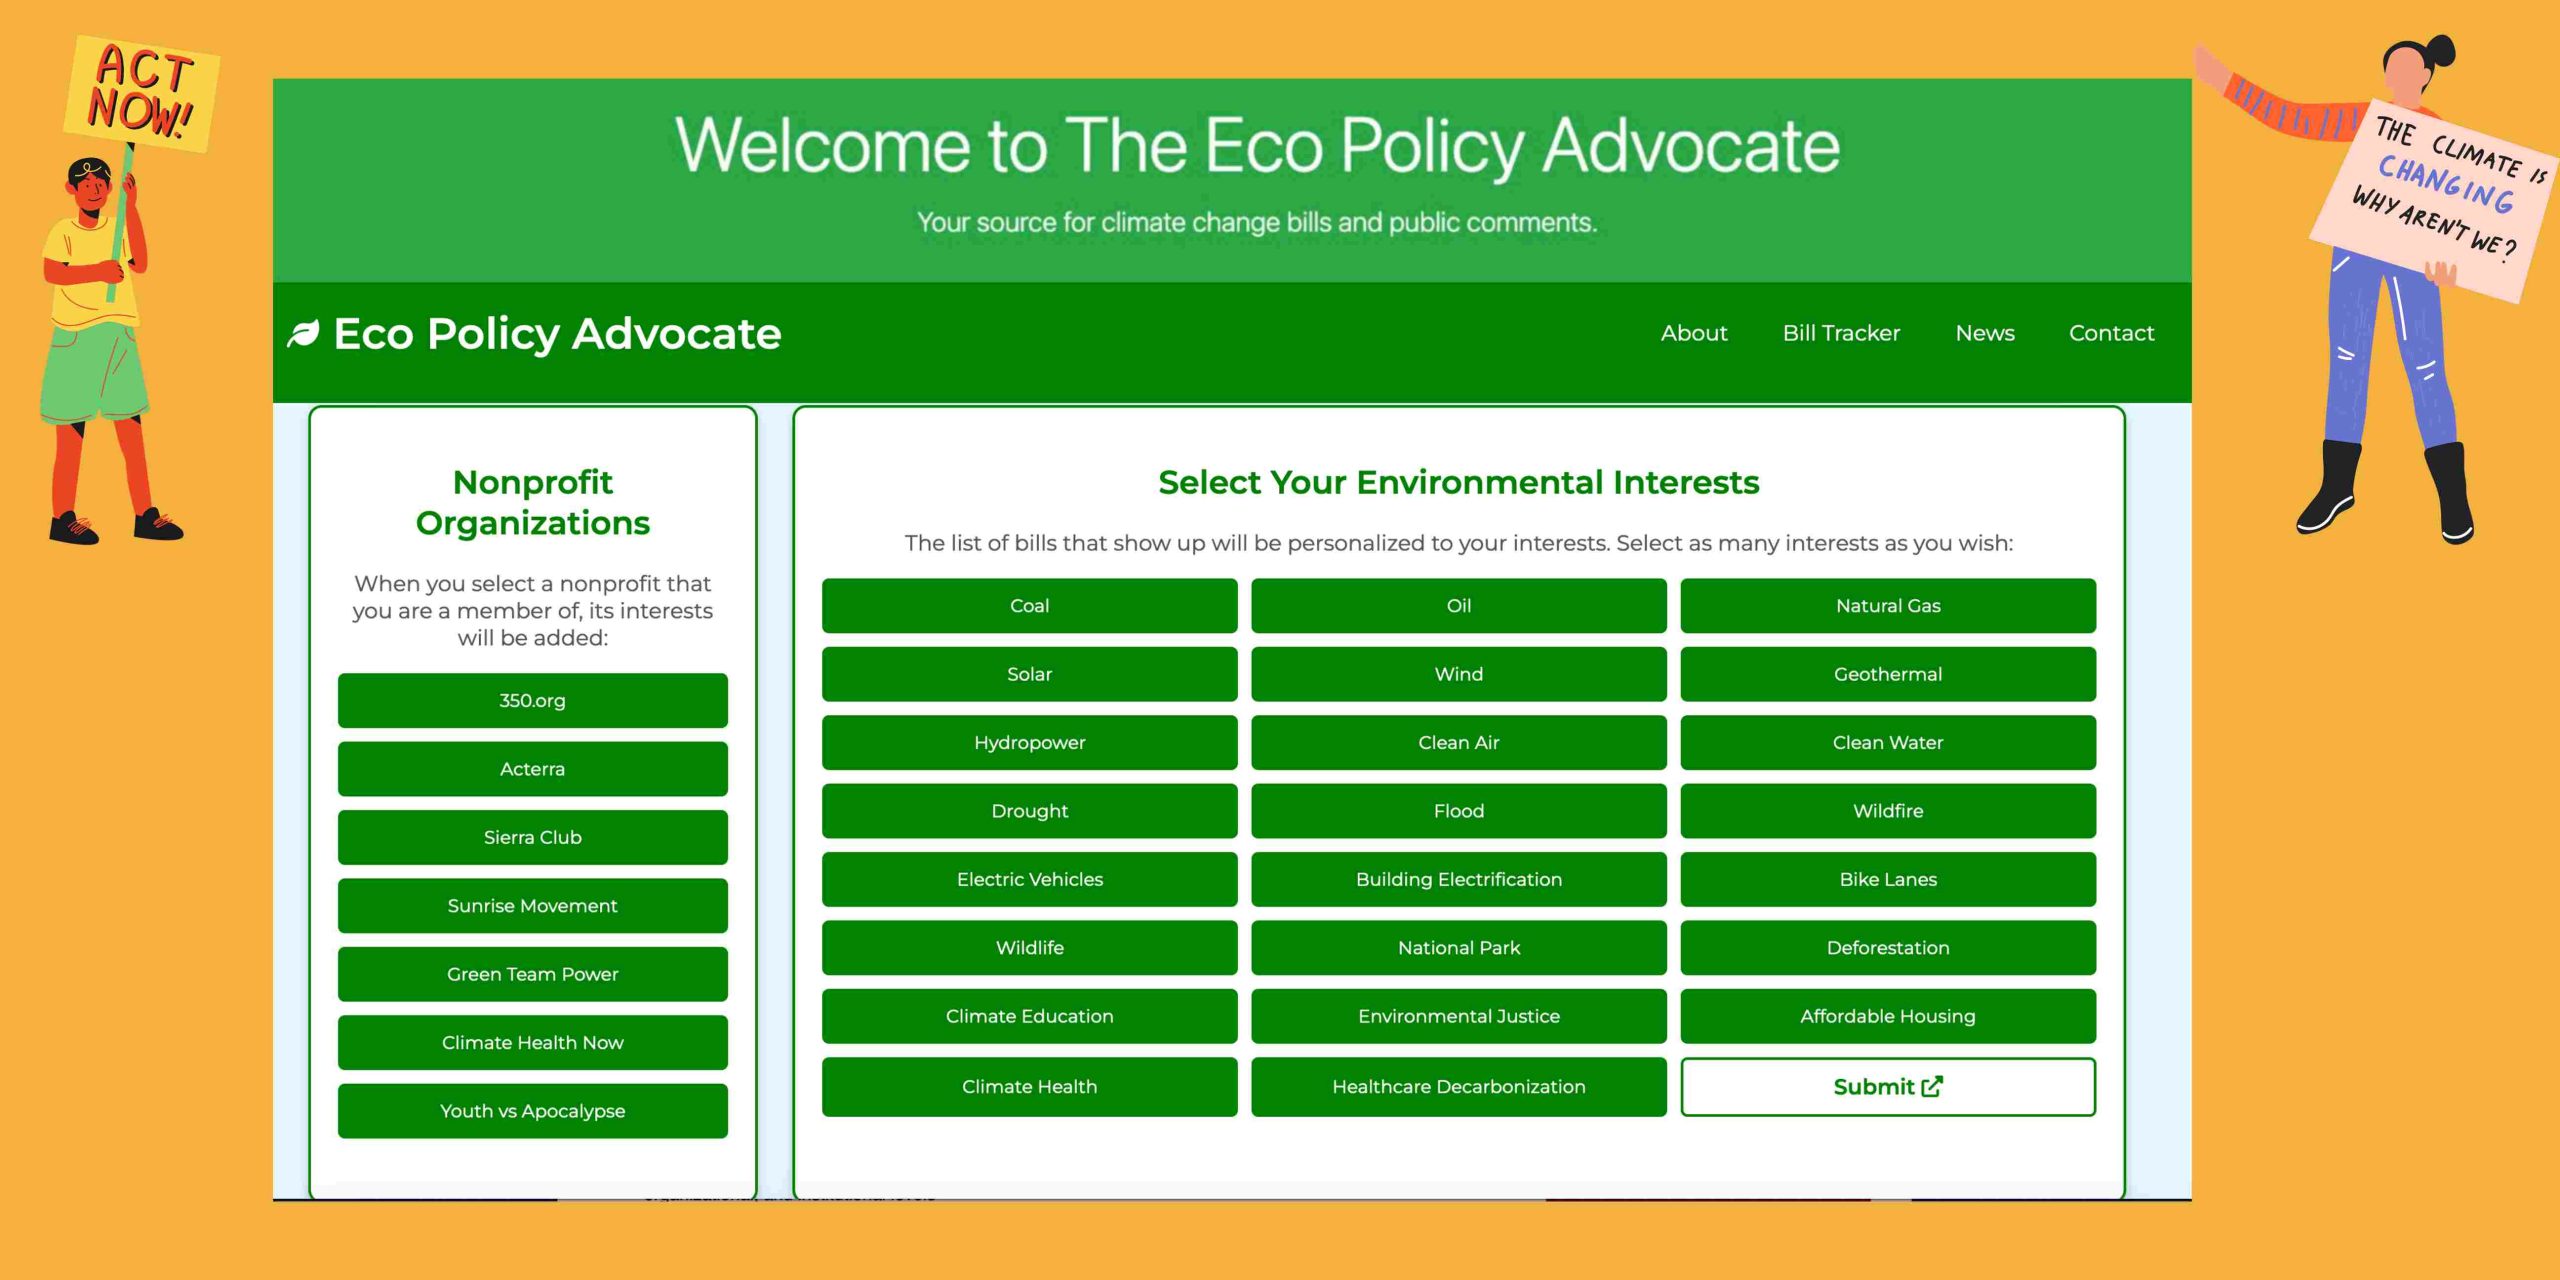 The Eco Policy Advocate Tool